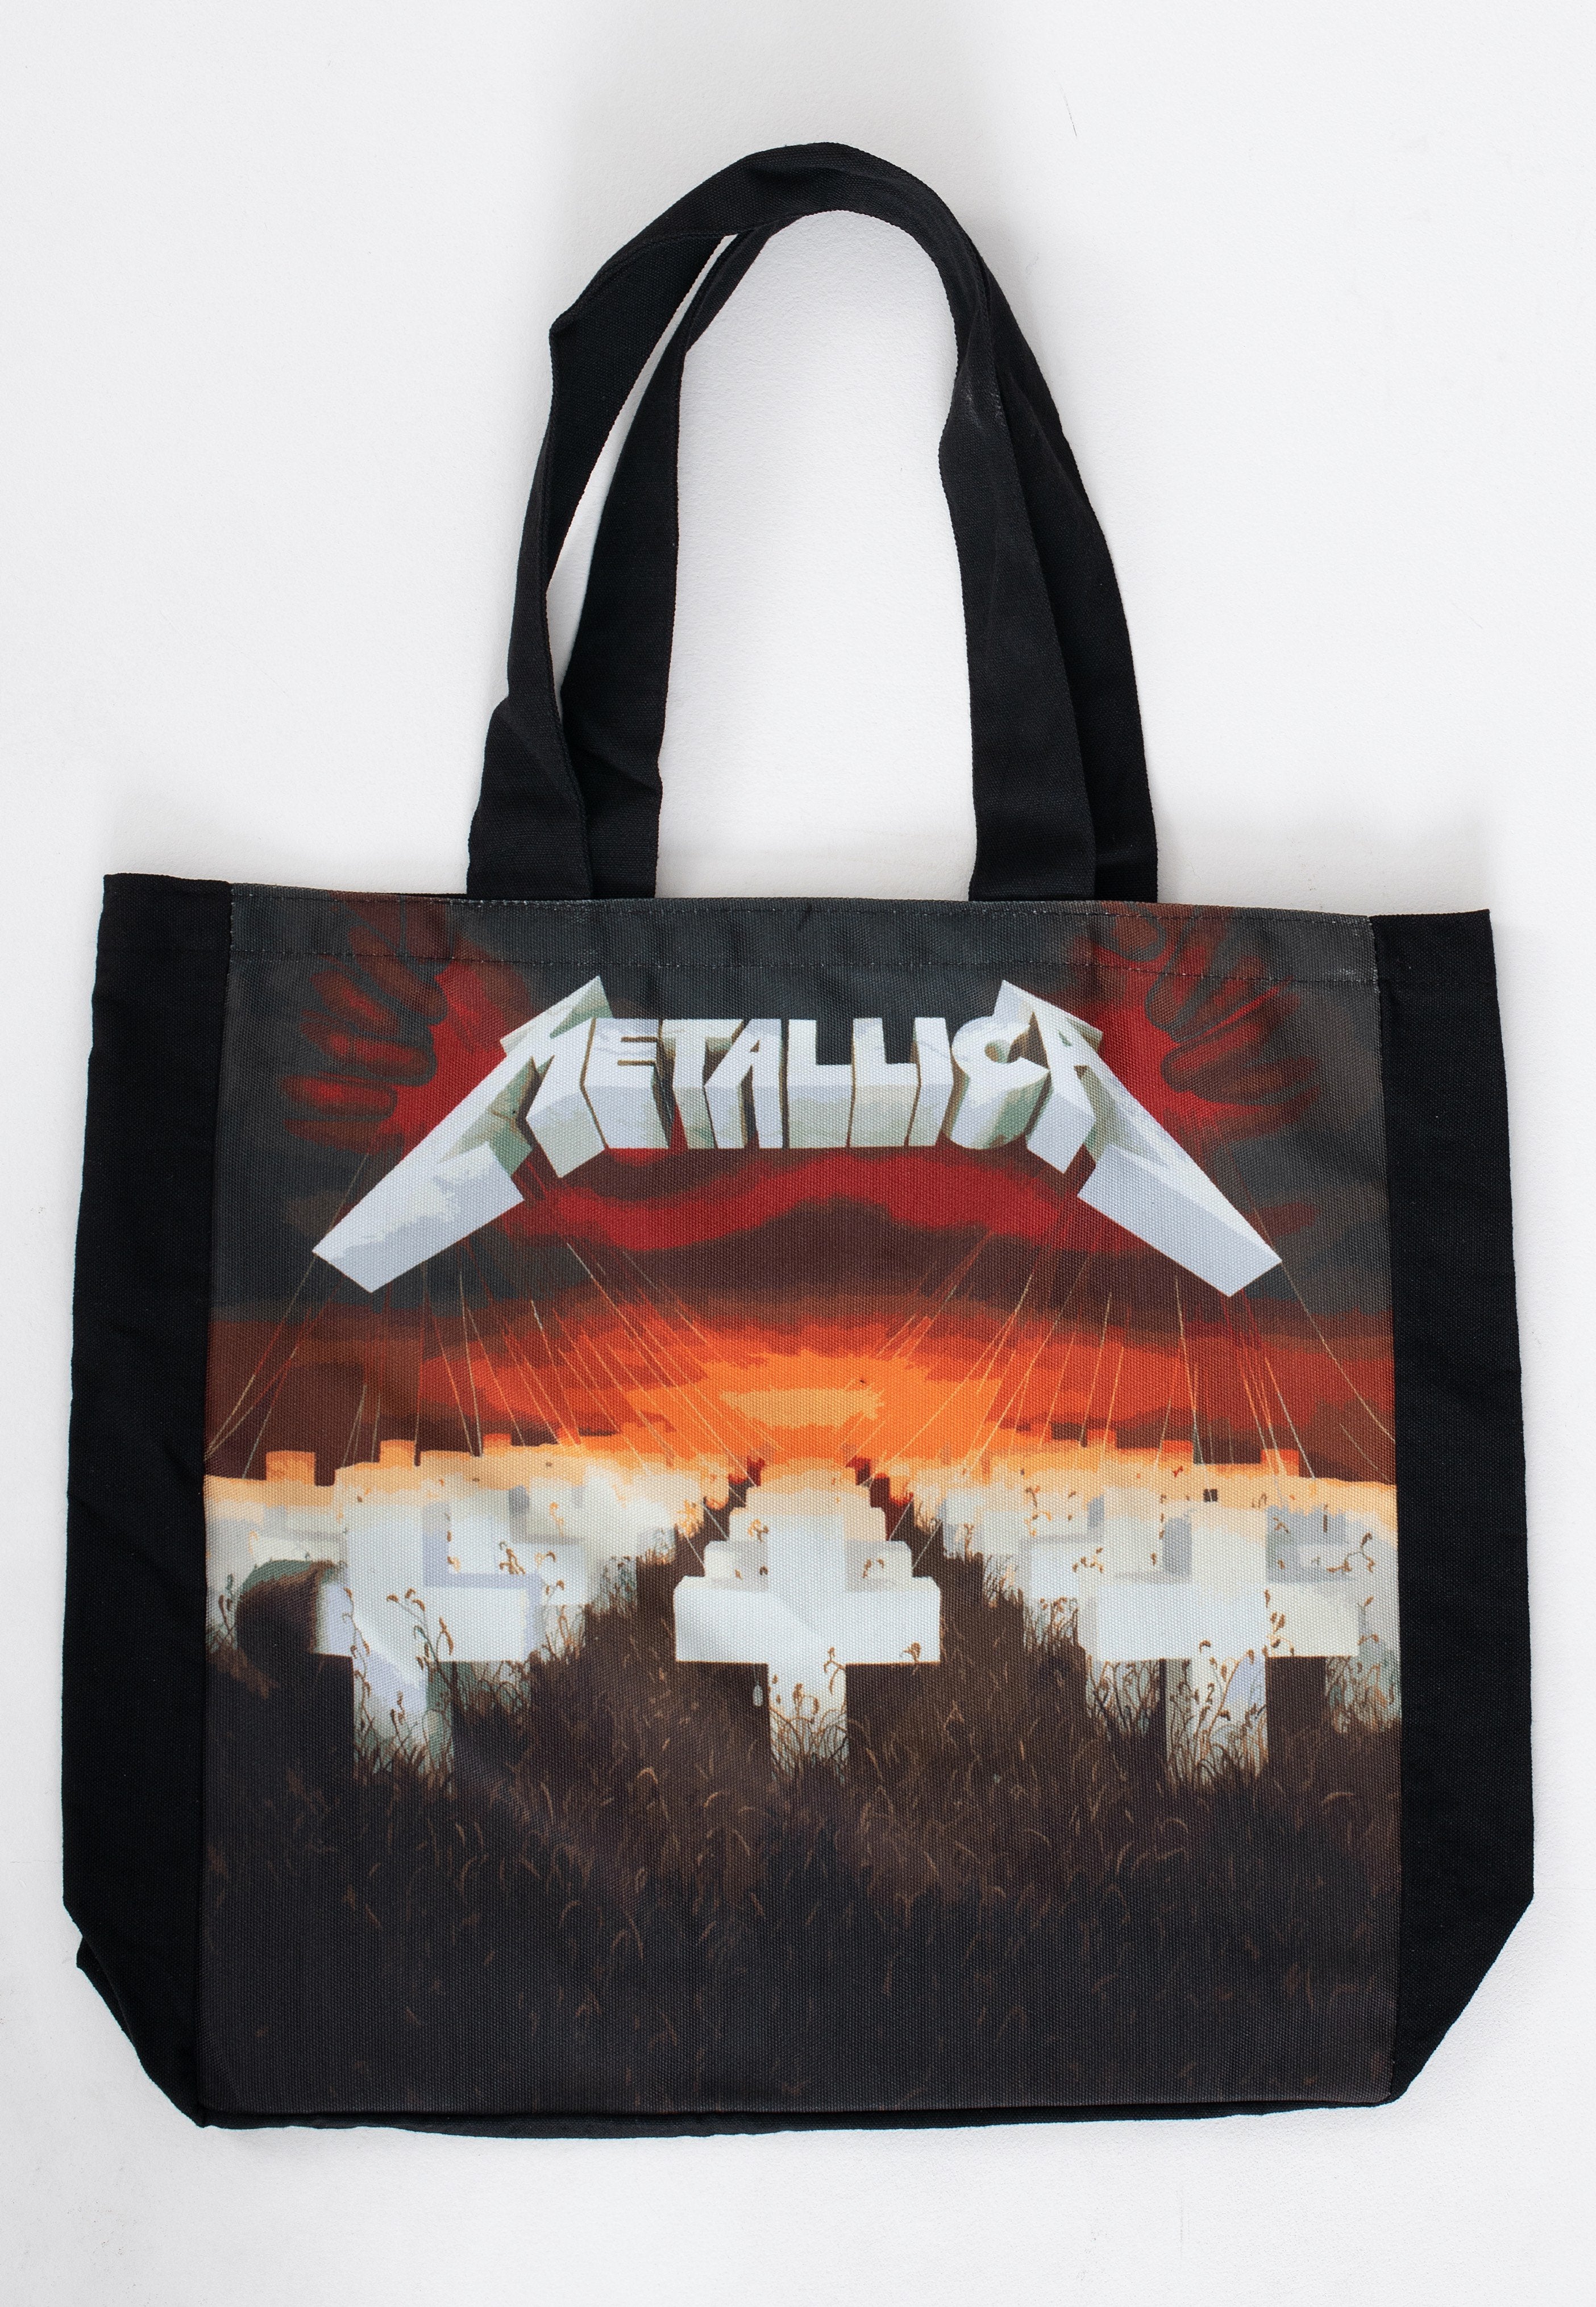 Metallica - Master Of Puppets - Tote Bag